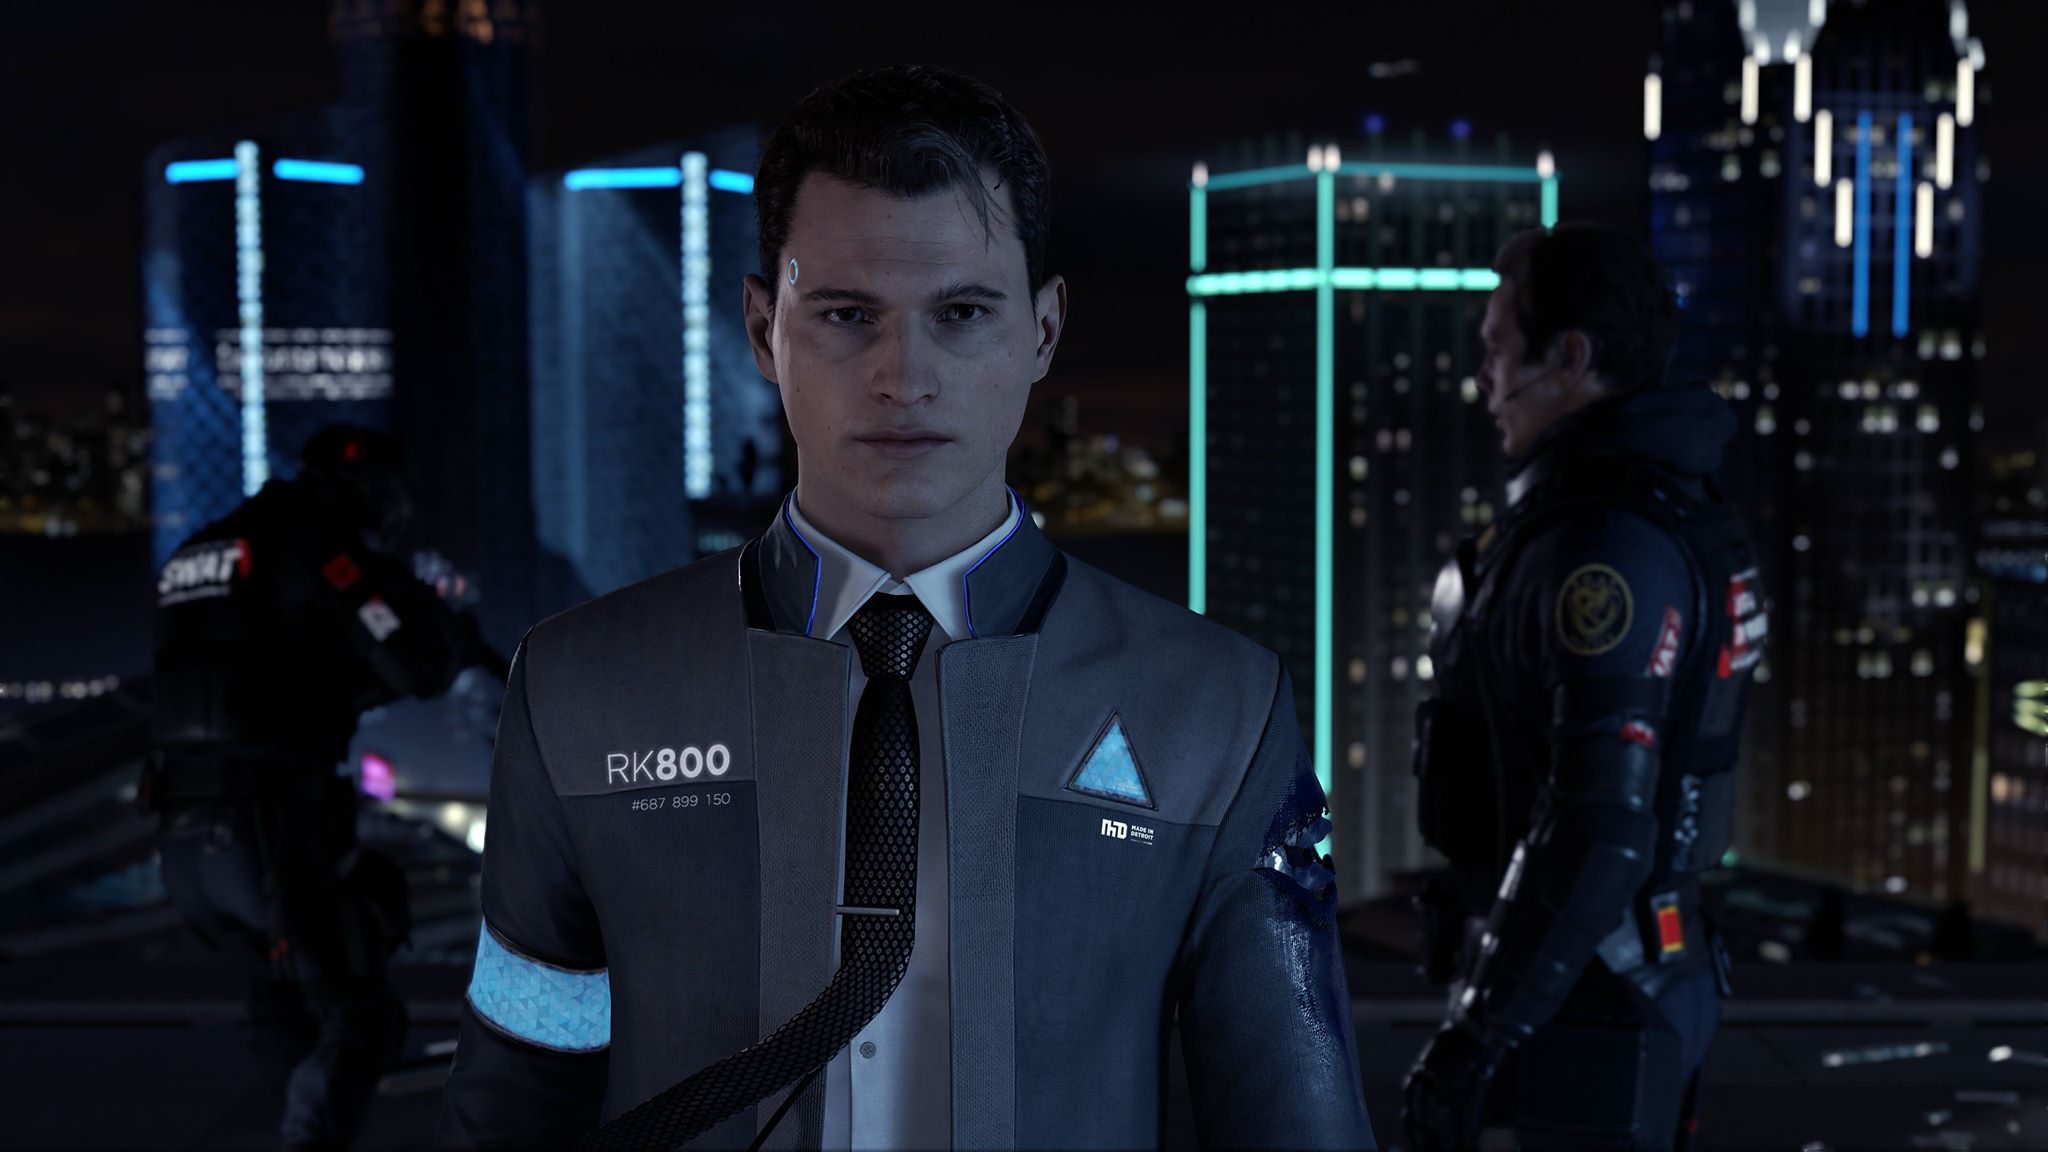 Connor’s only priority is to follow the protocol, but his harsh demeanor towards his fellow androids could shift as he discovers the truth behind all the deviancy. Kara and Markus (not pictured here) also keep to their code until the players start moving them  